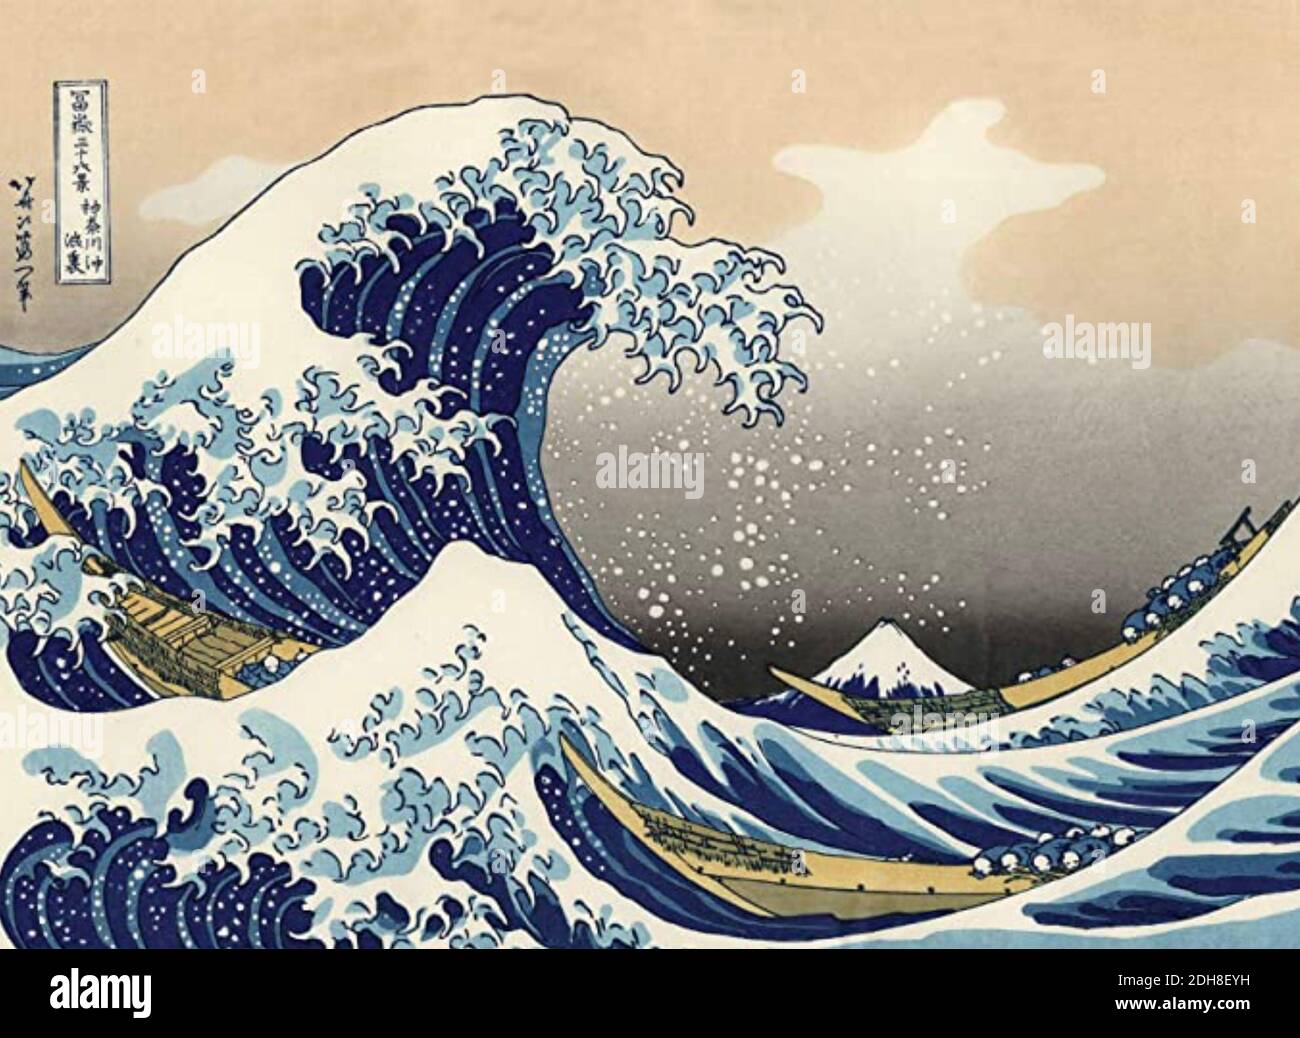 HOKUSAI (1760-1849) Japanese artist who created Thirty-six Views of Mount Fuji between about 1830 and 1832. The Great Wave off Kanagawa is the best know print from the series. Stock Photo